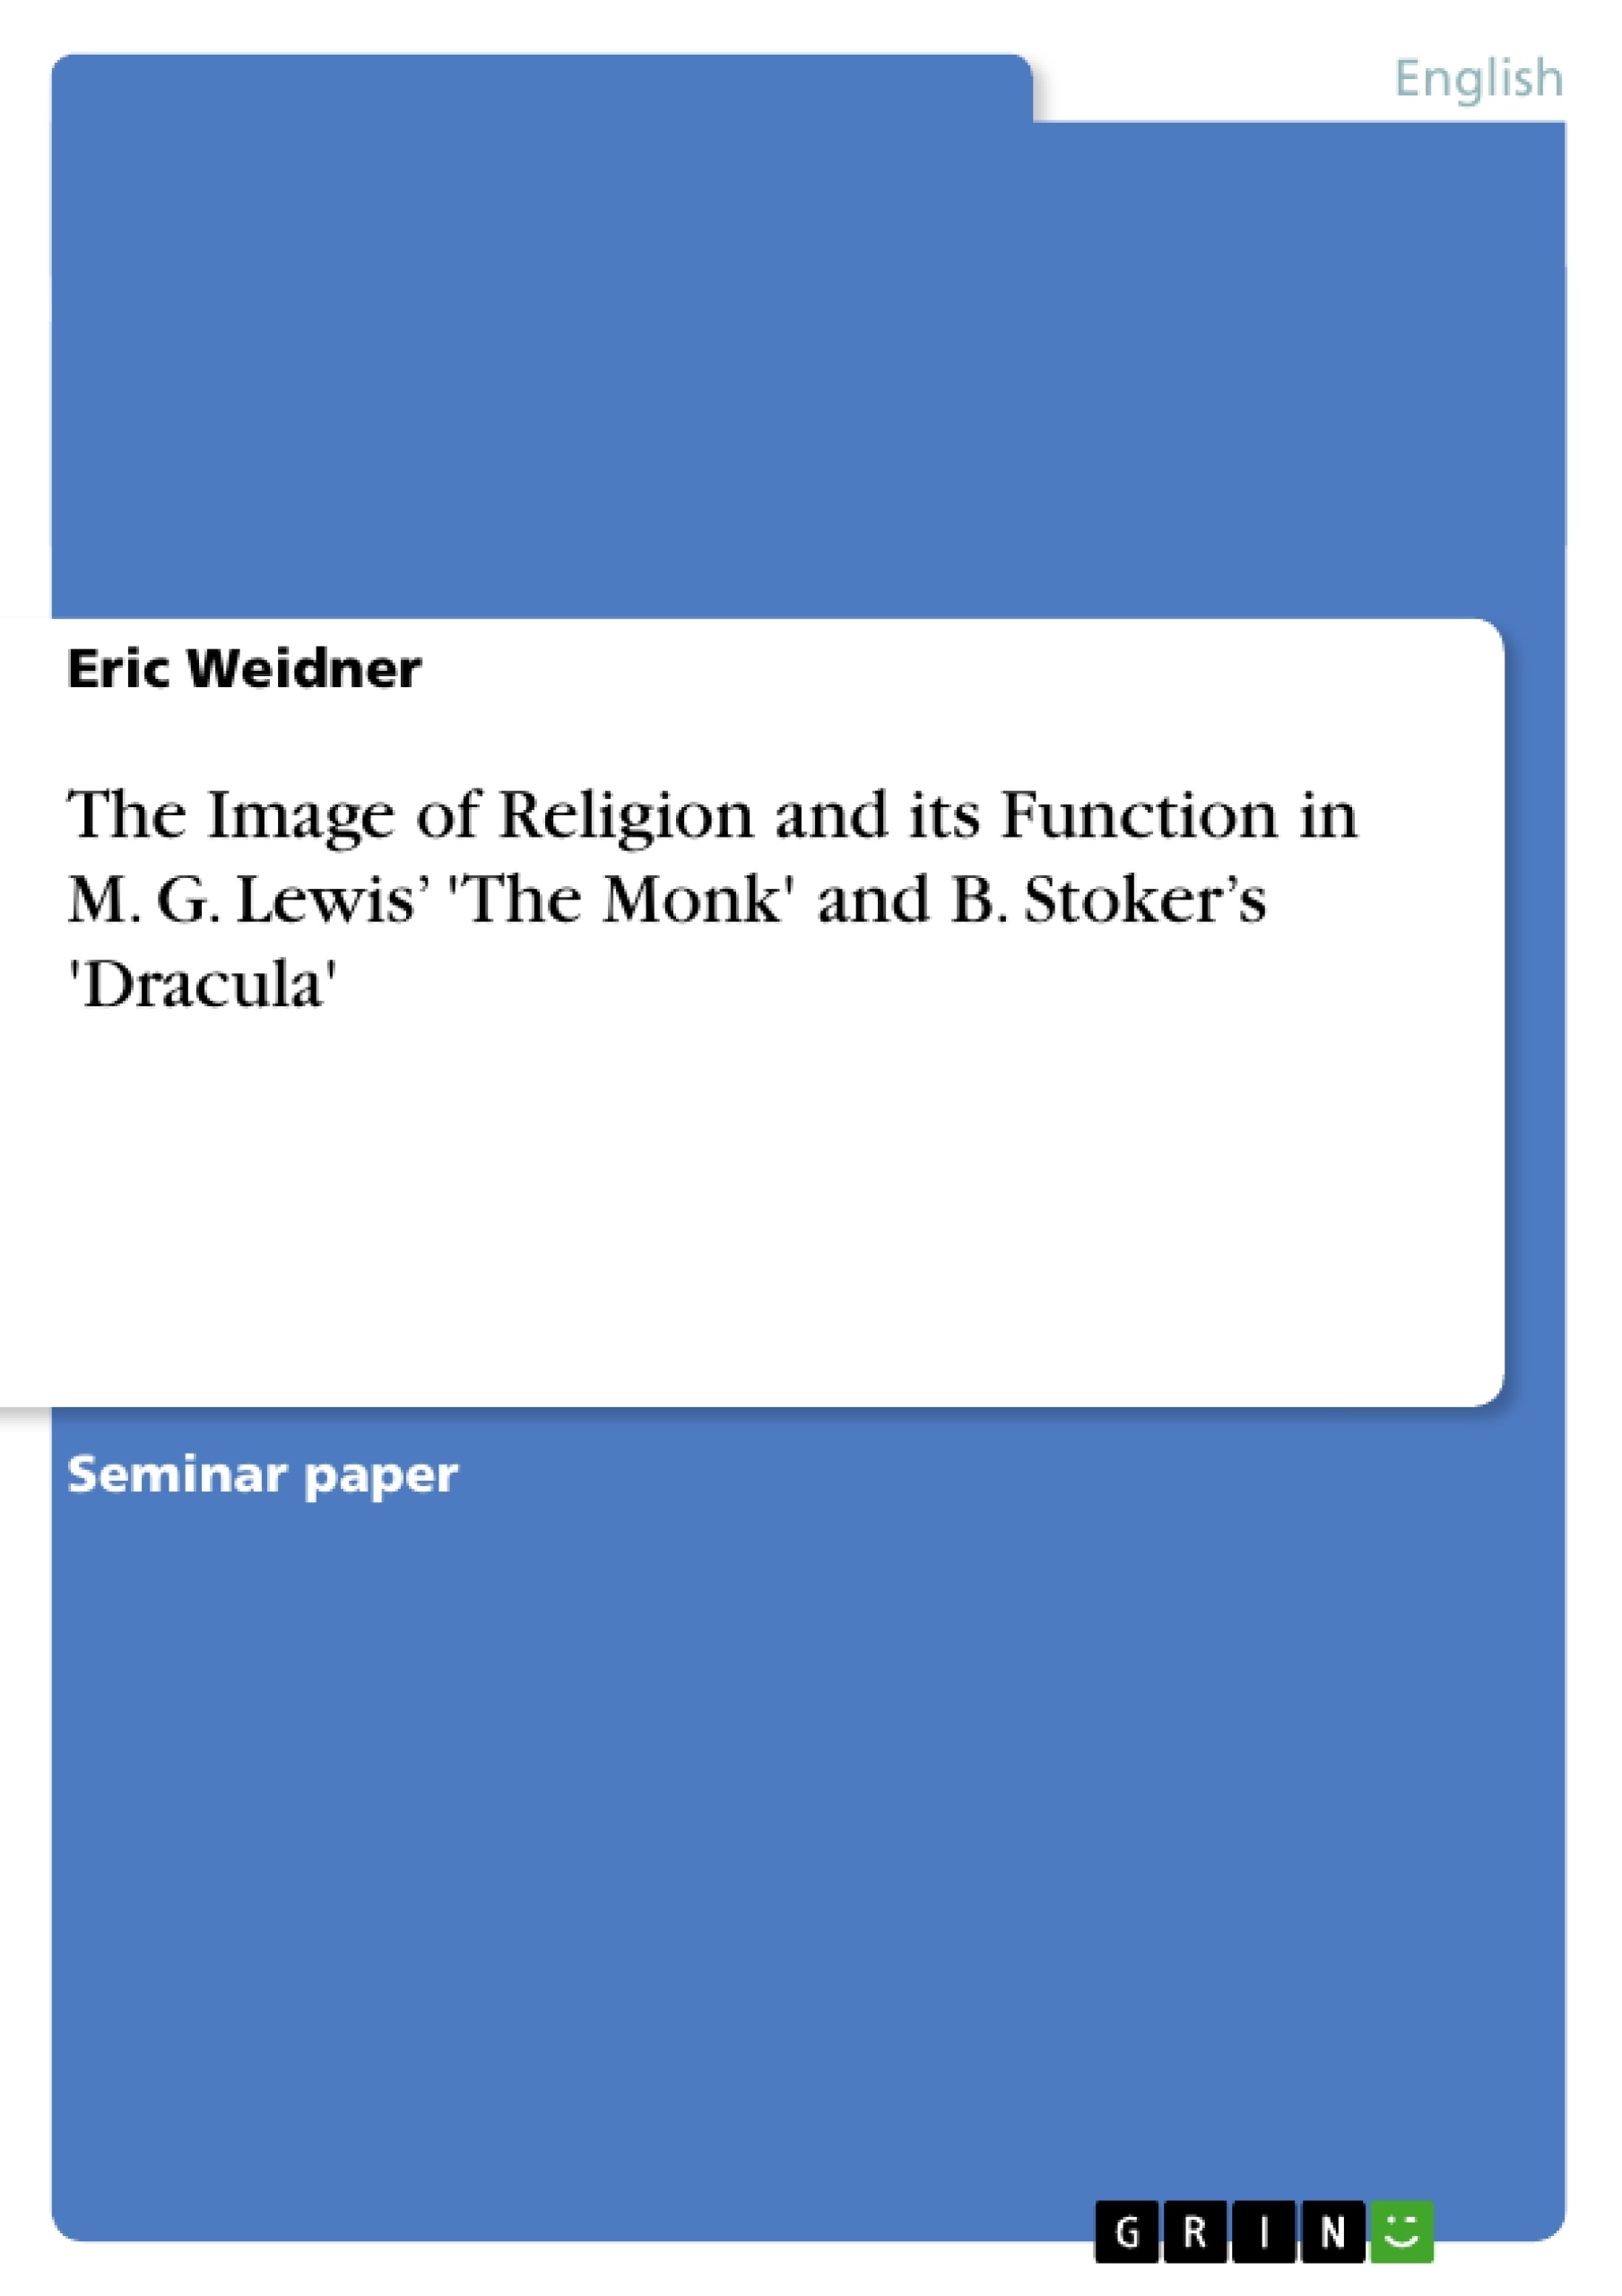 Title: The Image of Religion and its Function in M. G. Lewis’ 'The Monk' and B. Stoker’s 'Dracula'